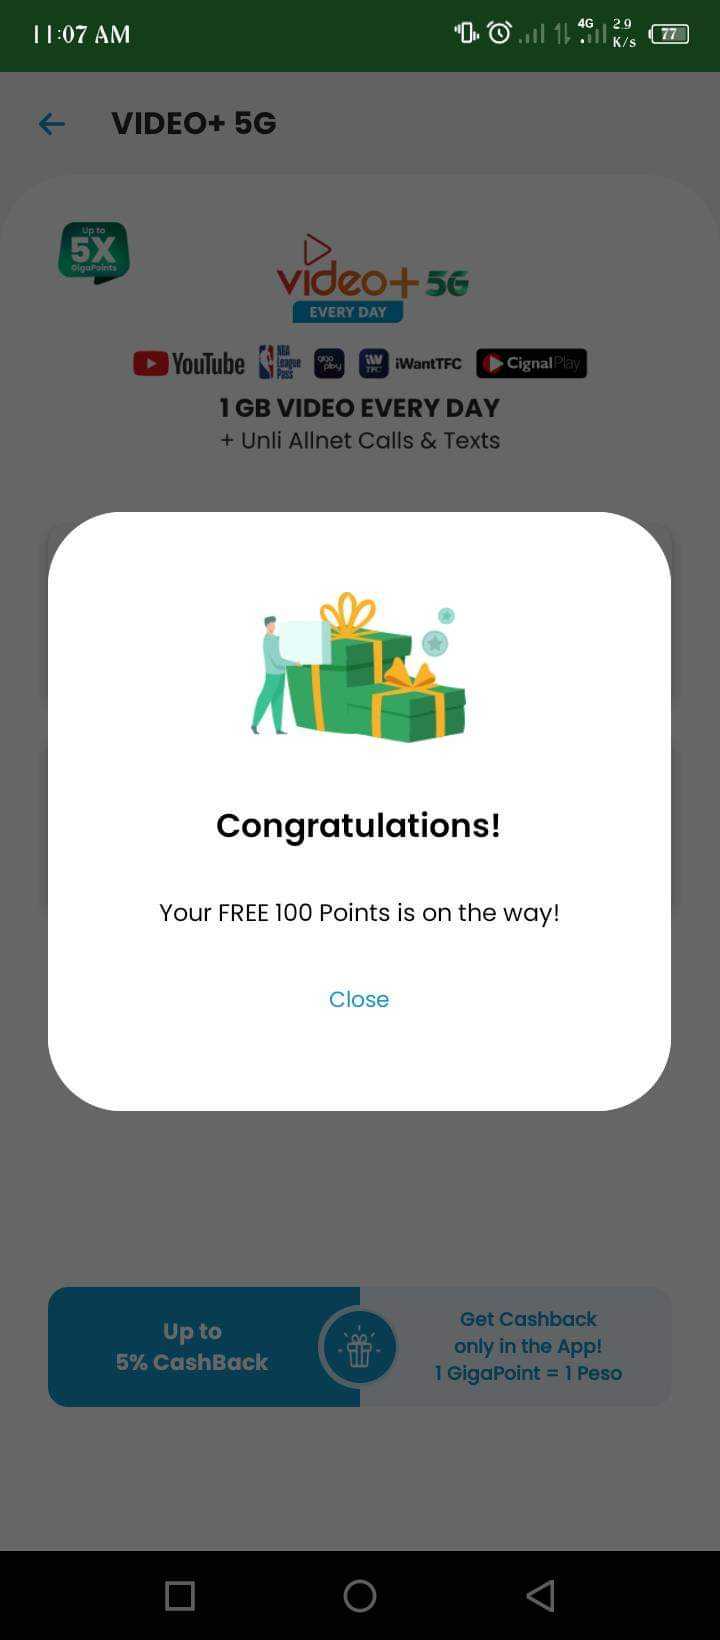 Smart TNT Sun - FREE 100 POINTS GIGA LIFE APP CLAIM NA | Pinoy Internet and  Technology Forums